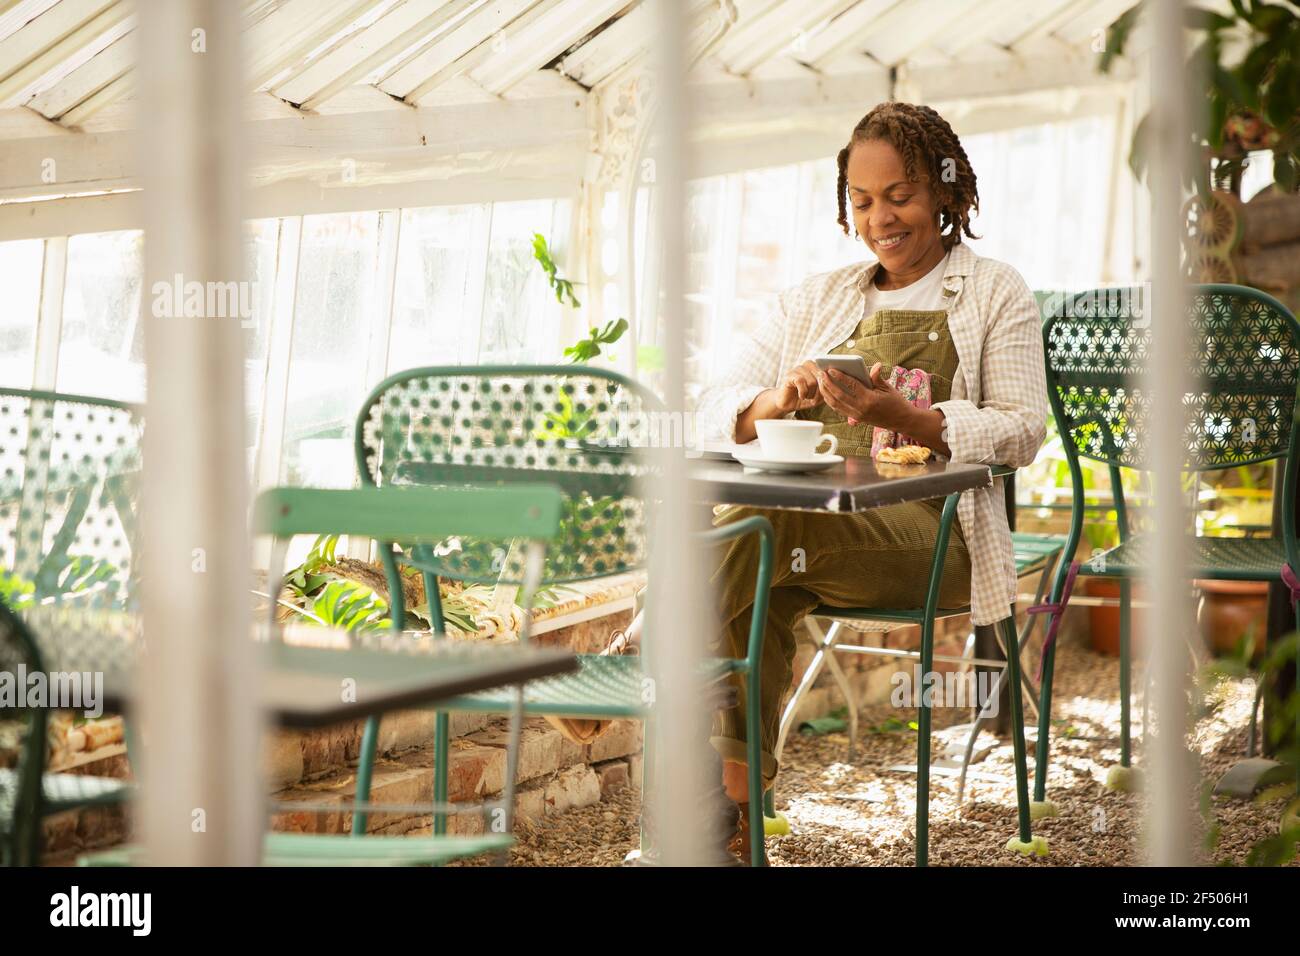 Woman with smart phone drinking tea in garden center greenhouse Stock Photo